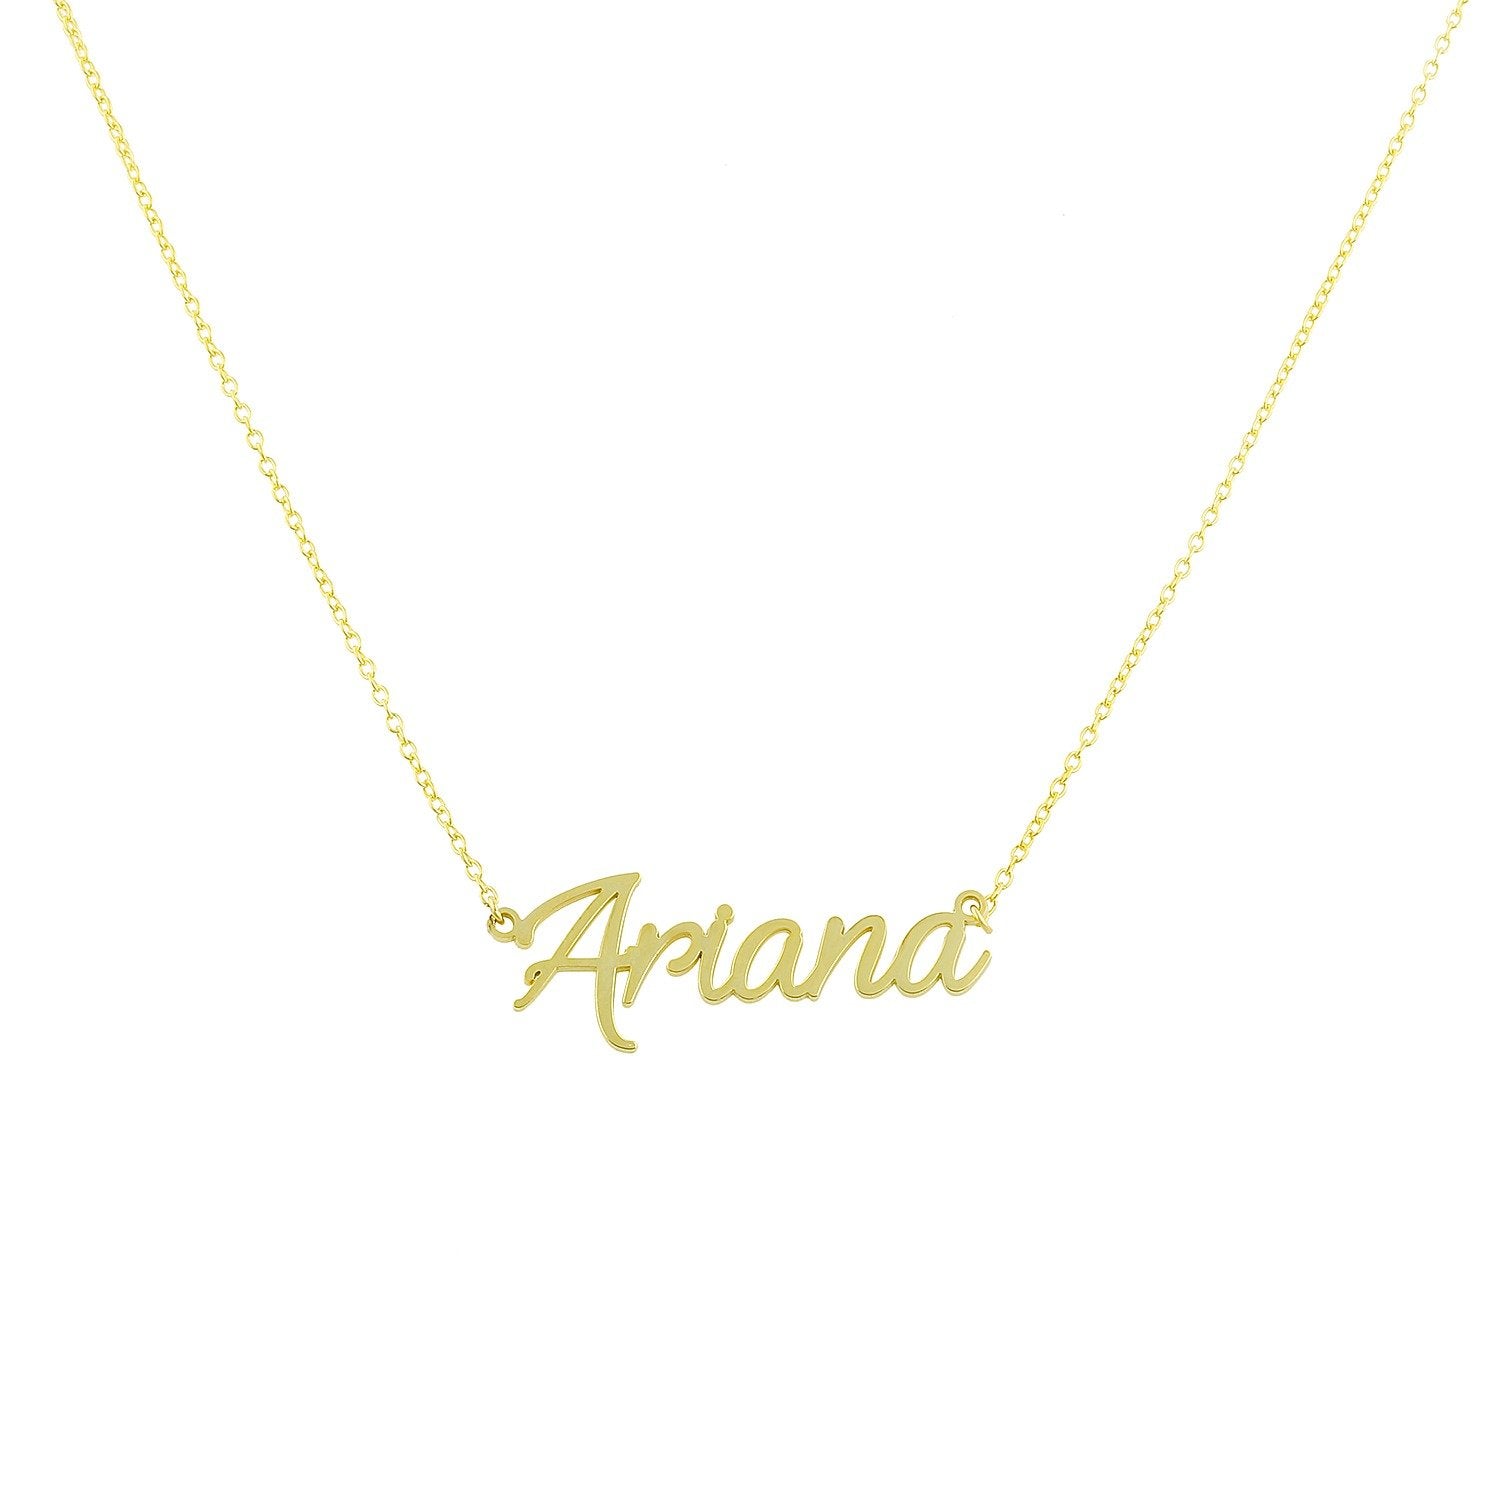 NON CUSTOMIZABLE Cursive Nameplate Necklaces JEWELRY The Sis Kiss